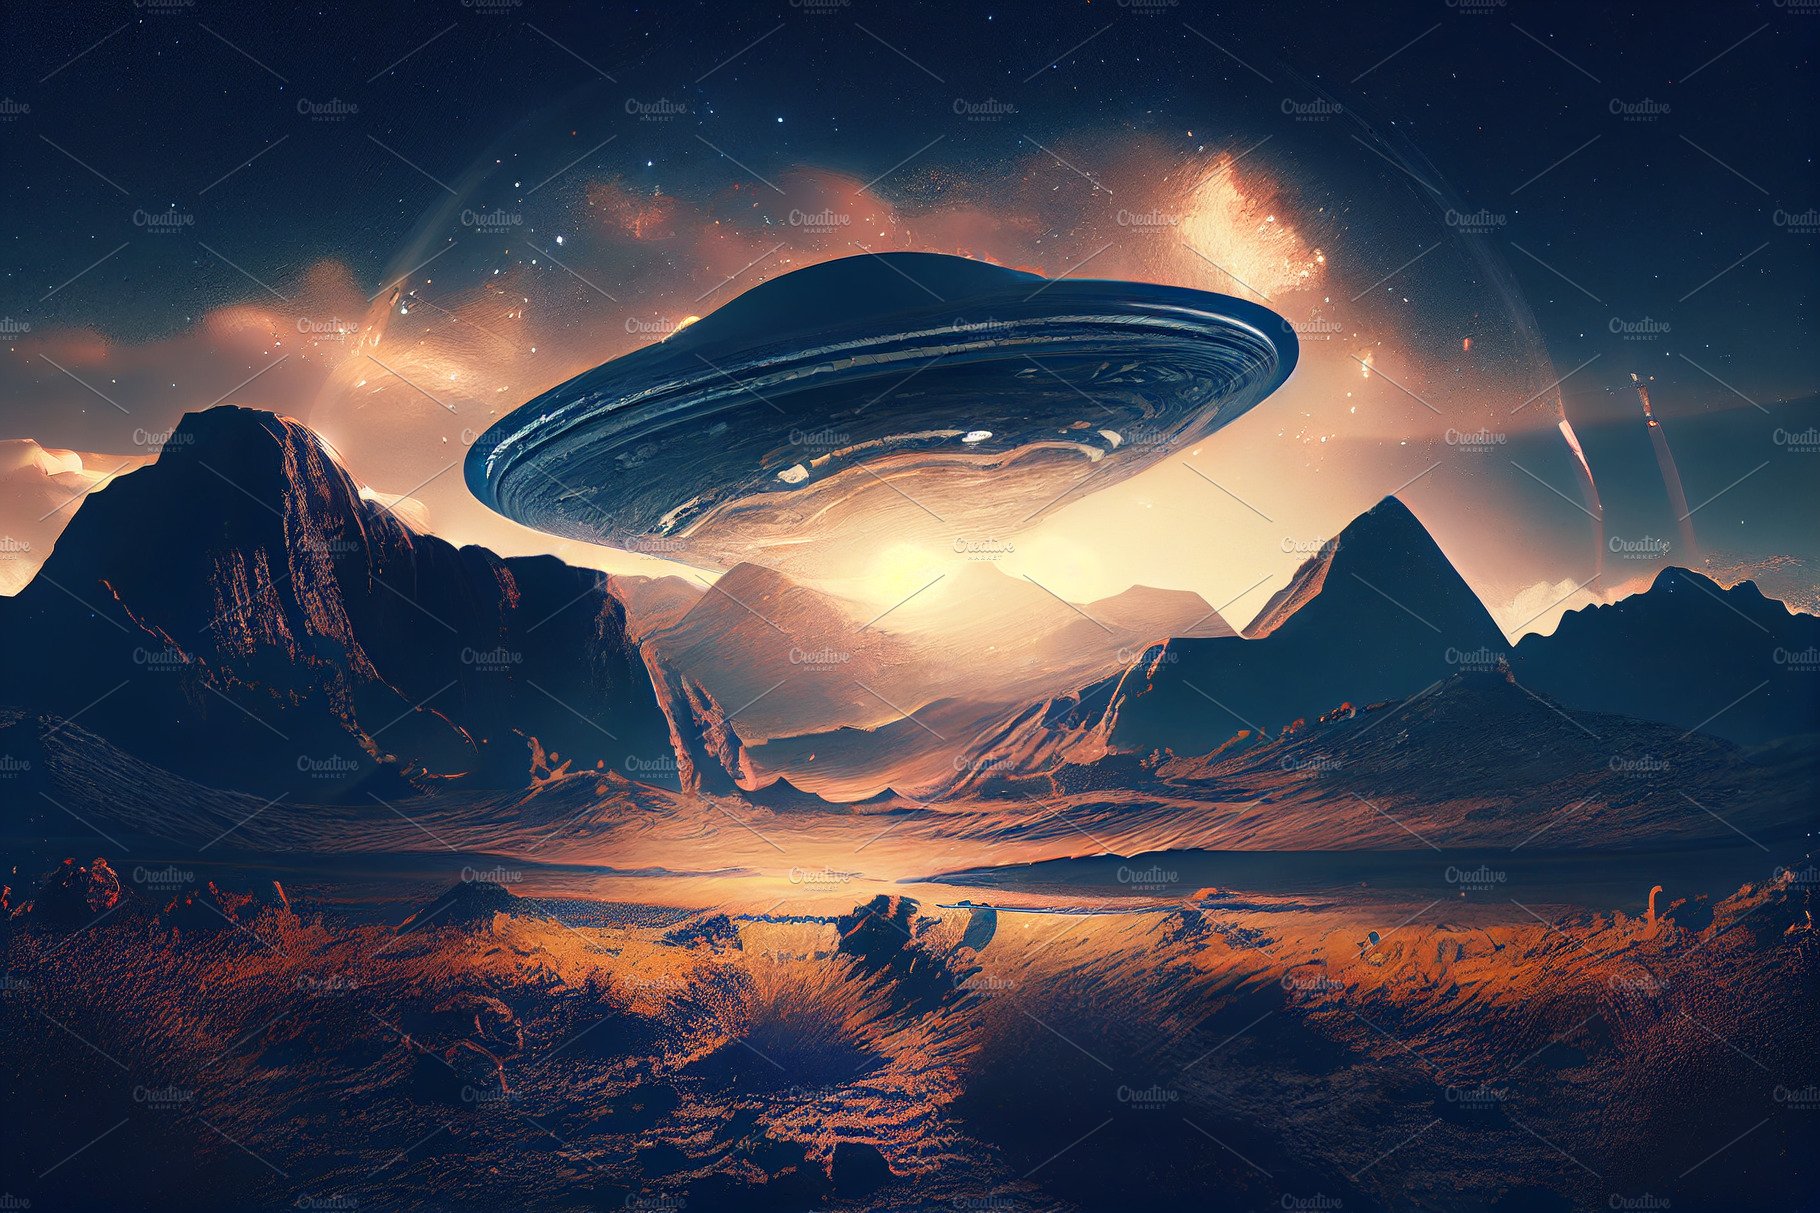 UFO invasion on planet earth landscape. Flying saucer flying close to the E... cover image.